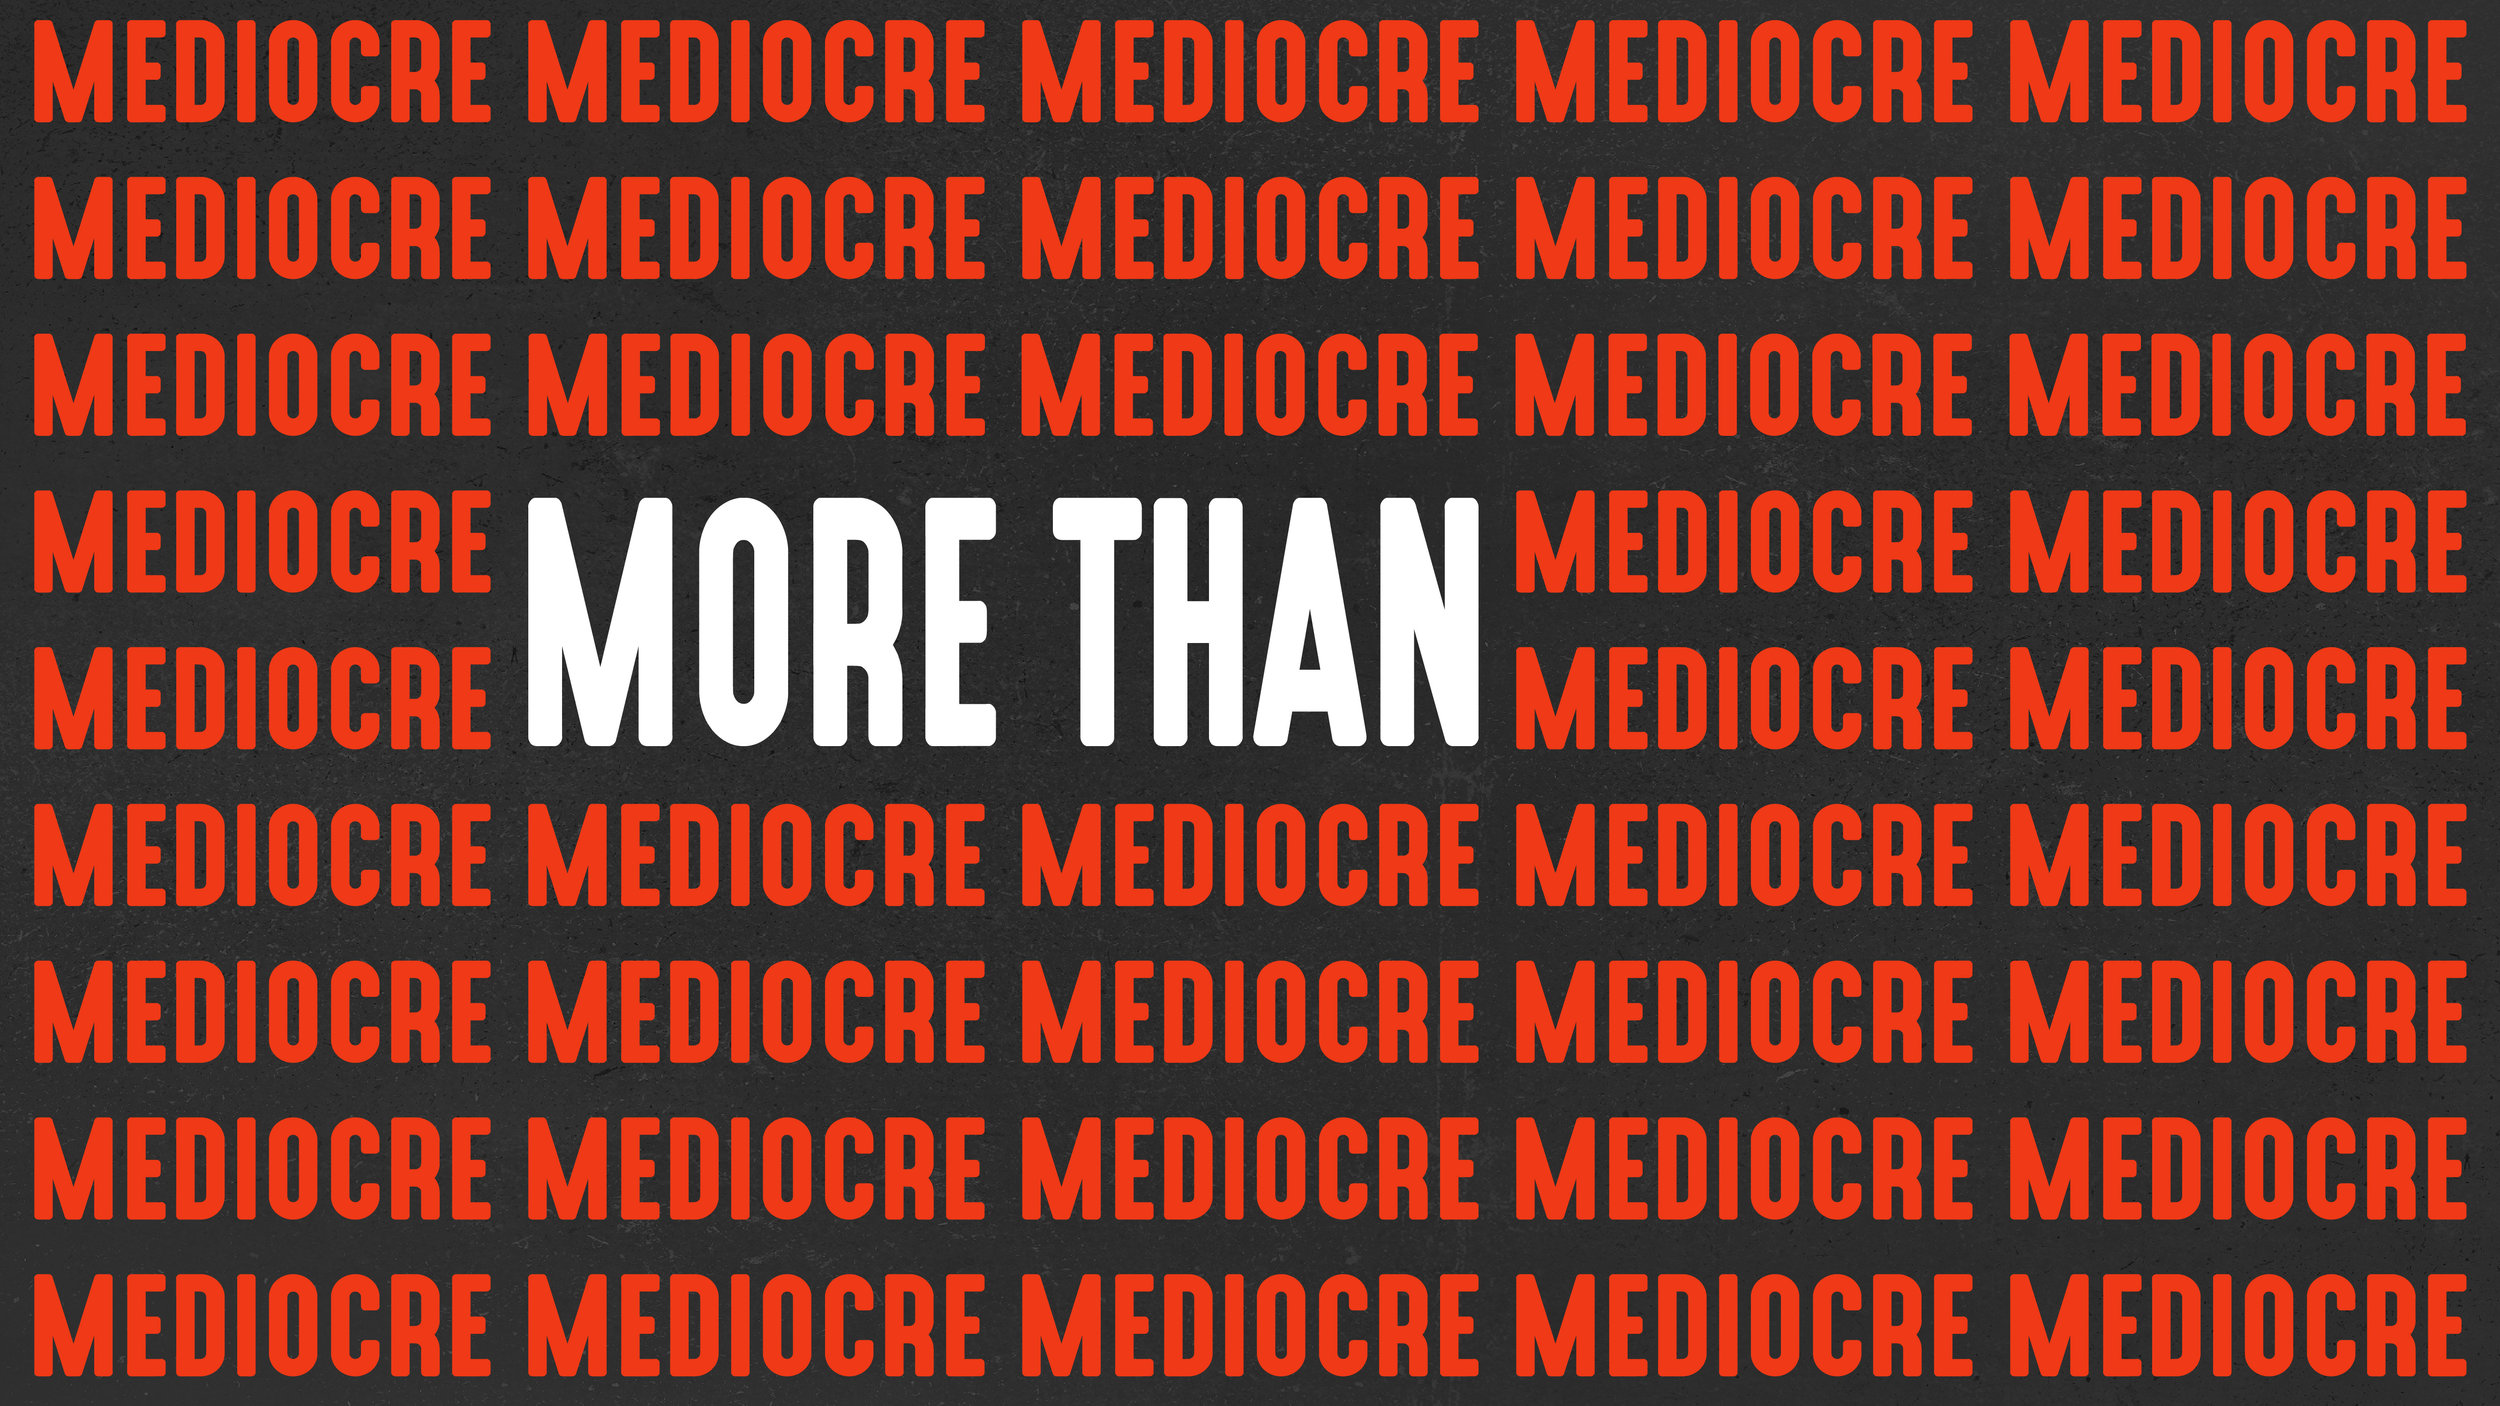 More Than Mediocre-02.jpg